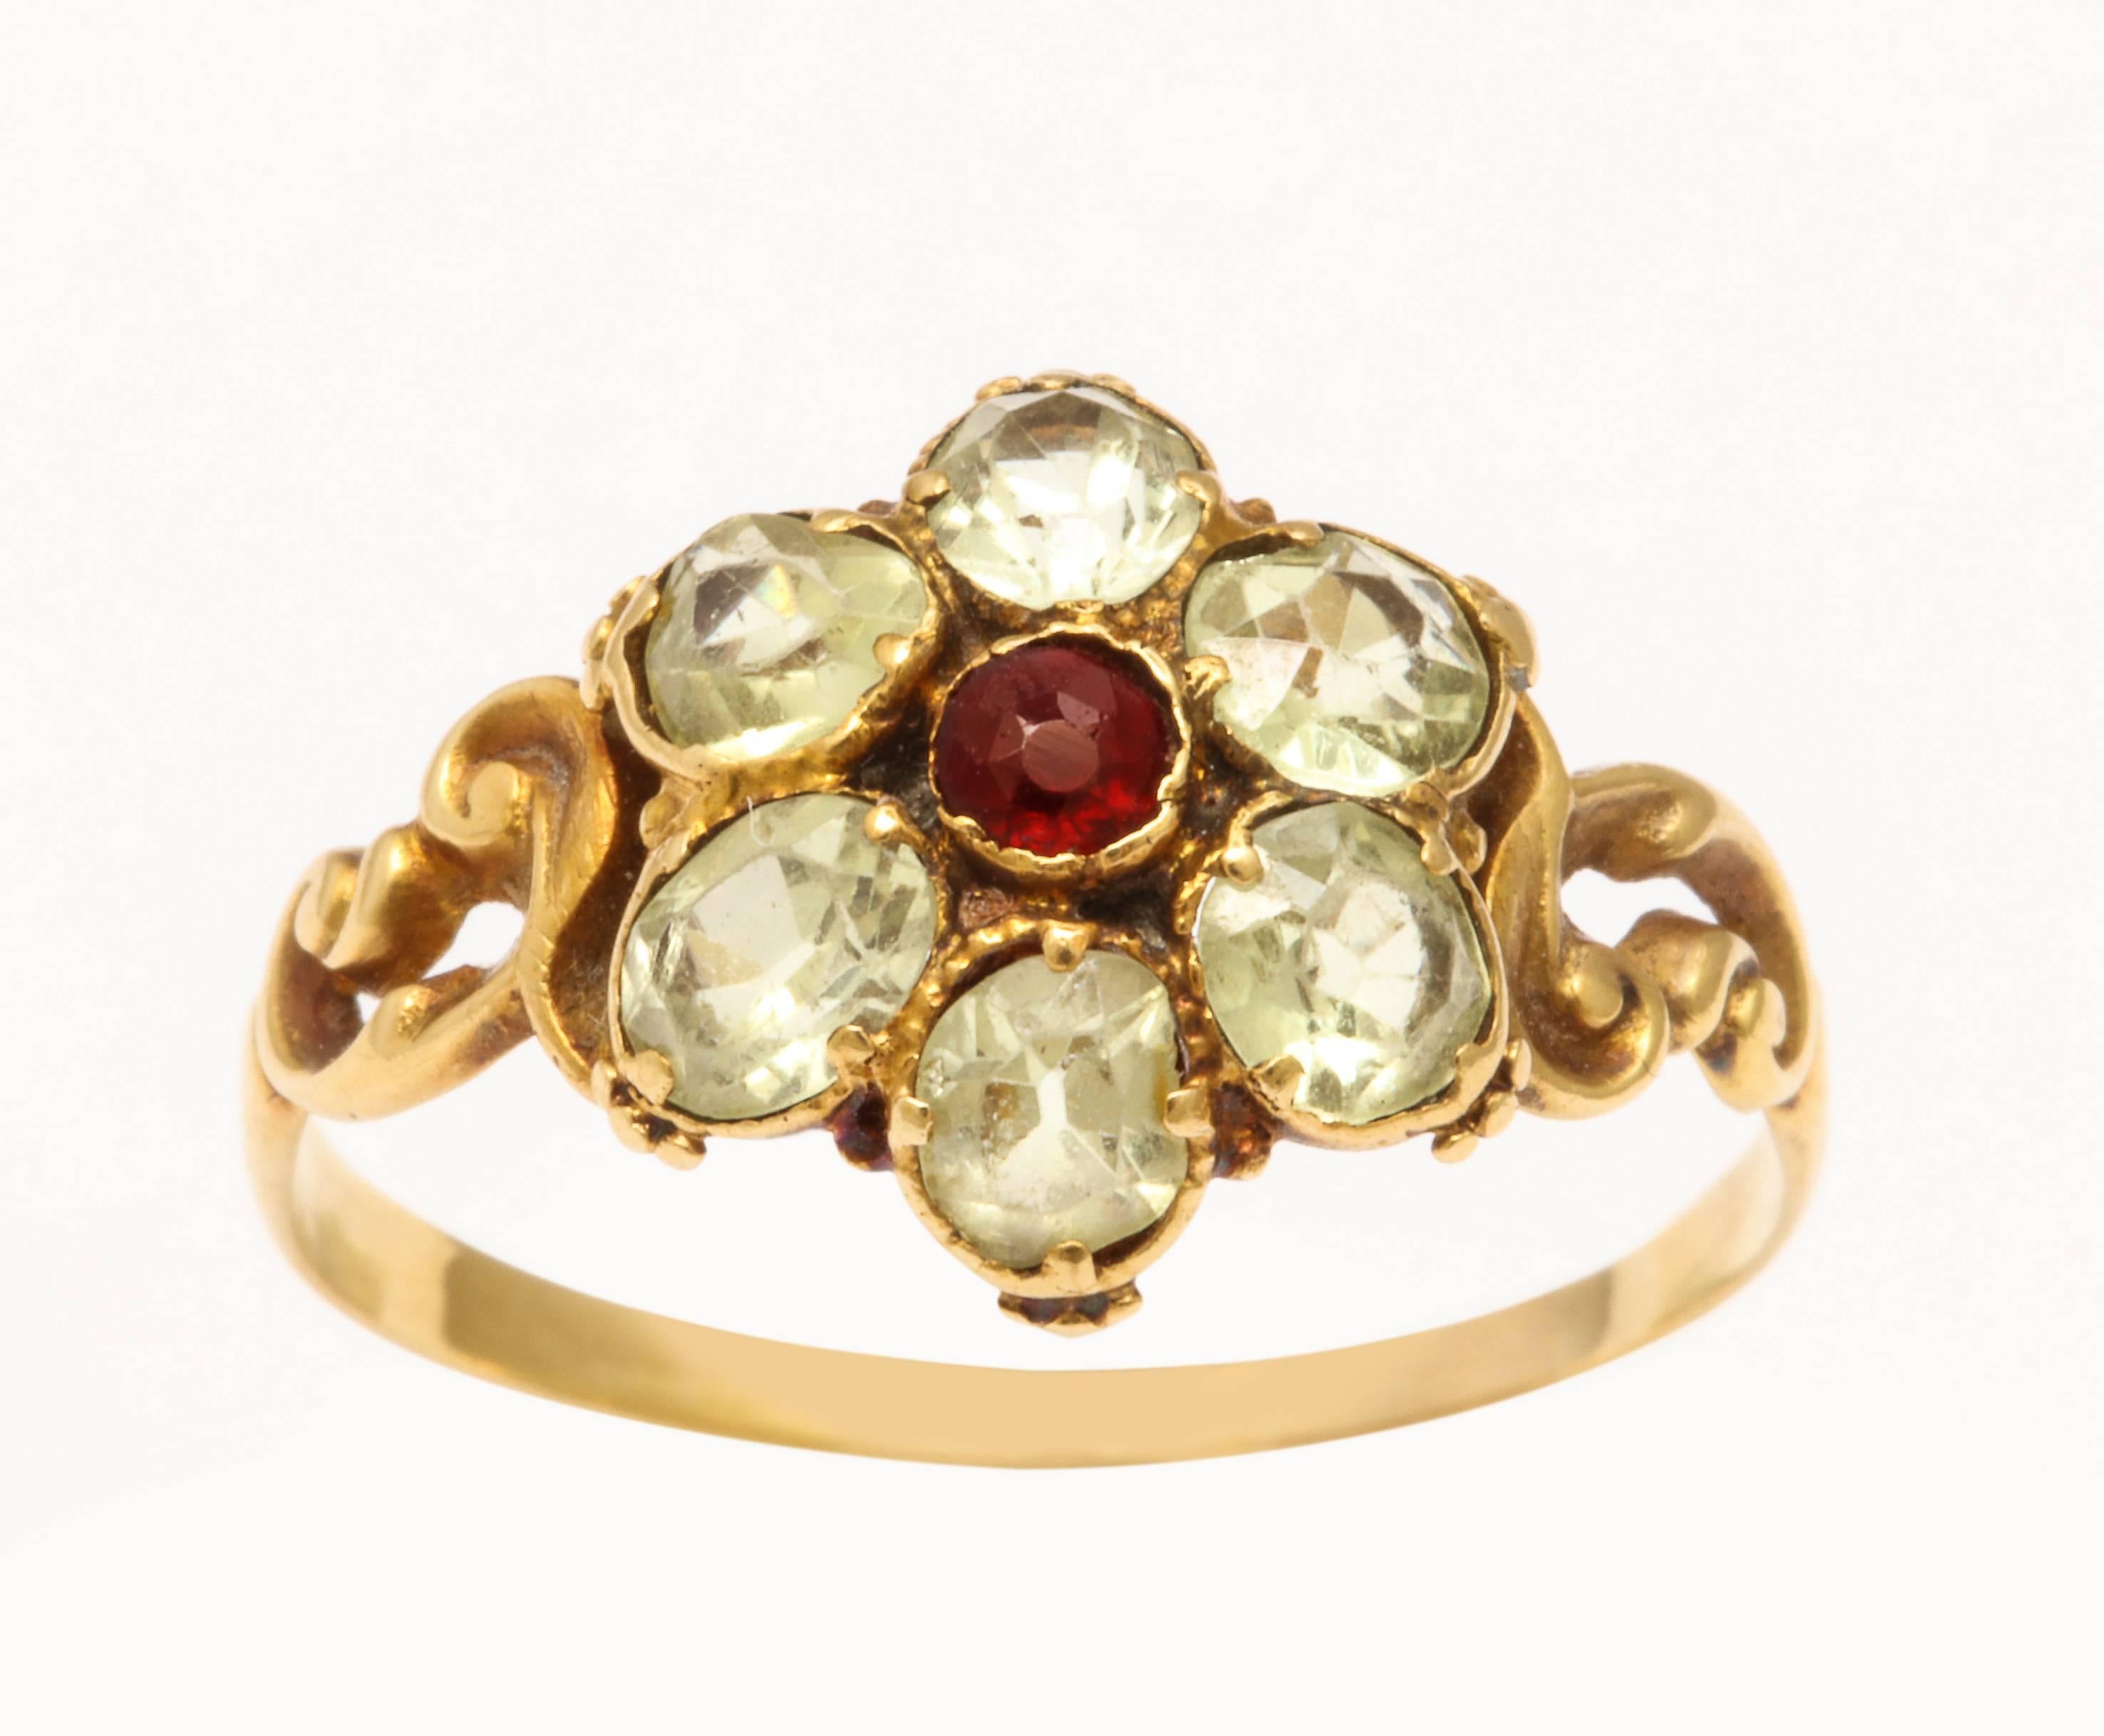 Mesmerizing, the cat's eye color of chrysolite is here set in a delicate flower in 15 kt gold with a garnet center. The stones, other than the garnet are set with open backs so that the light that enters increasing the beautiful apple green color.